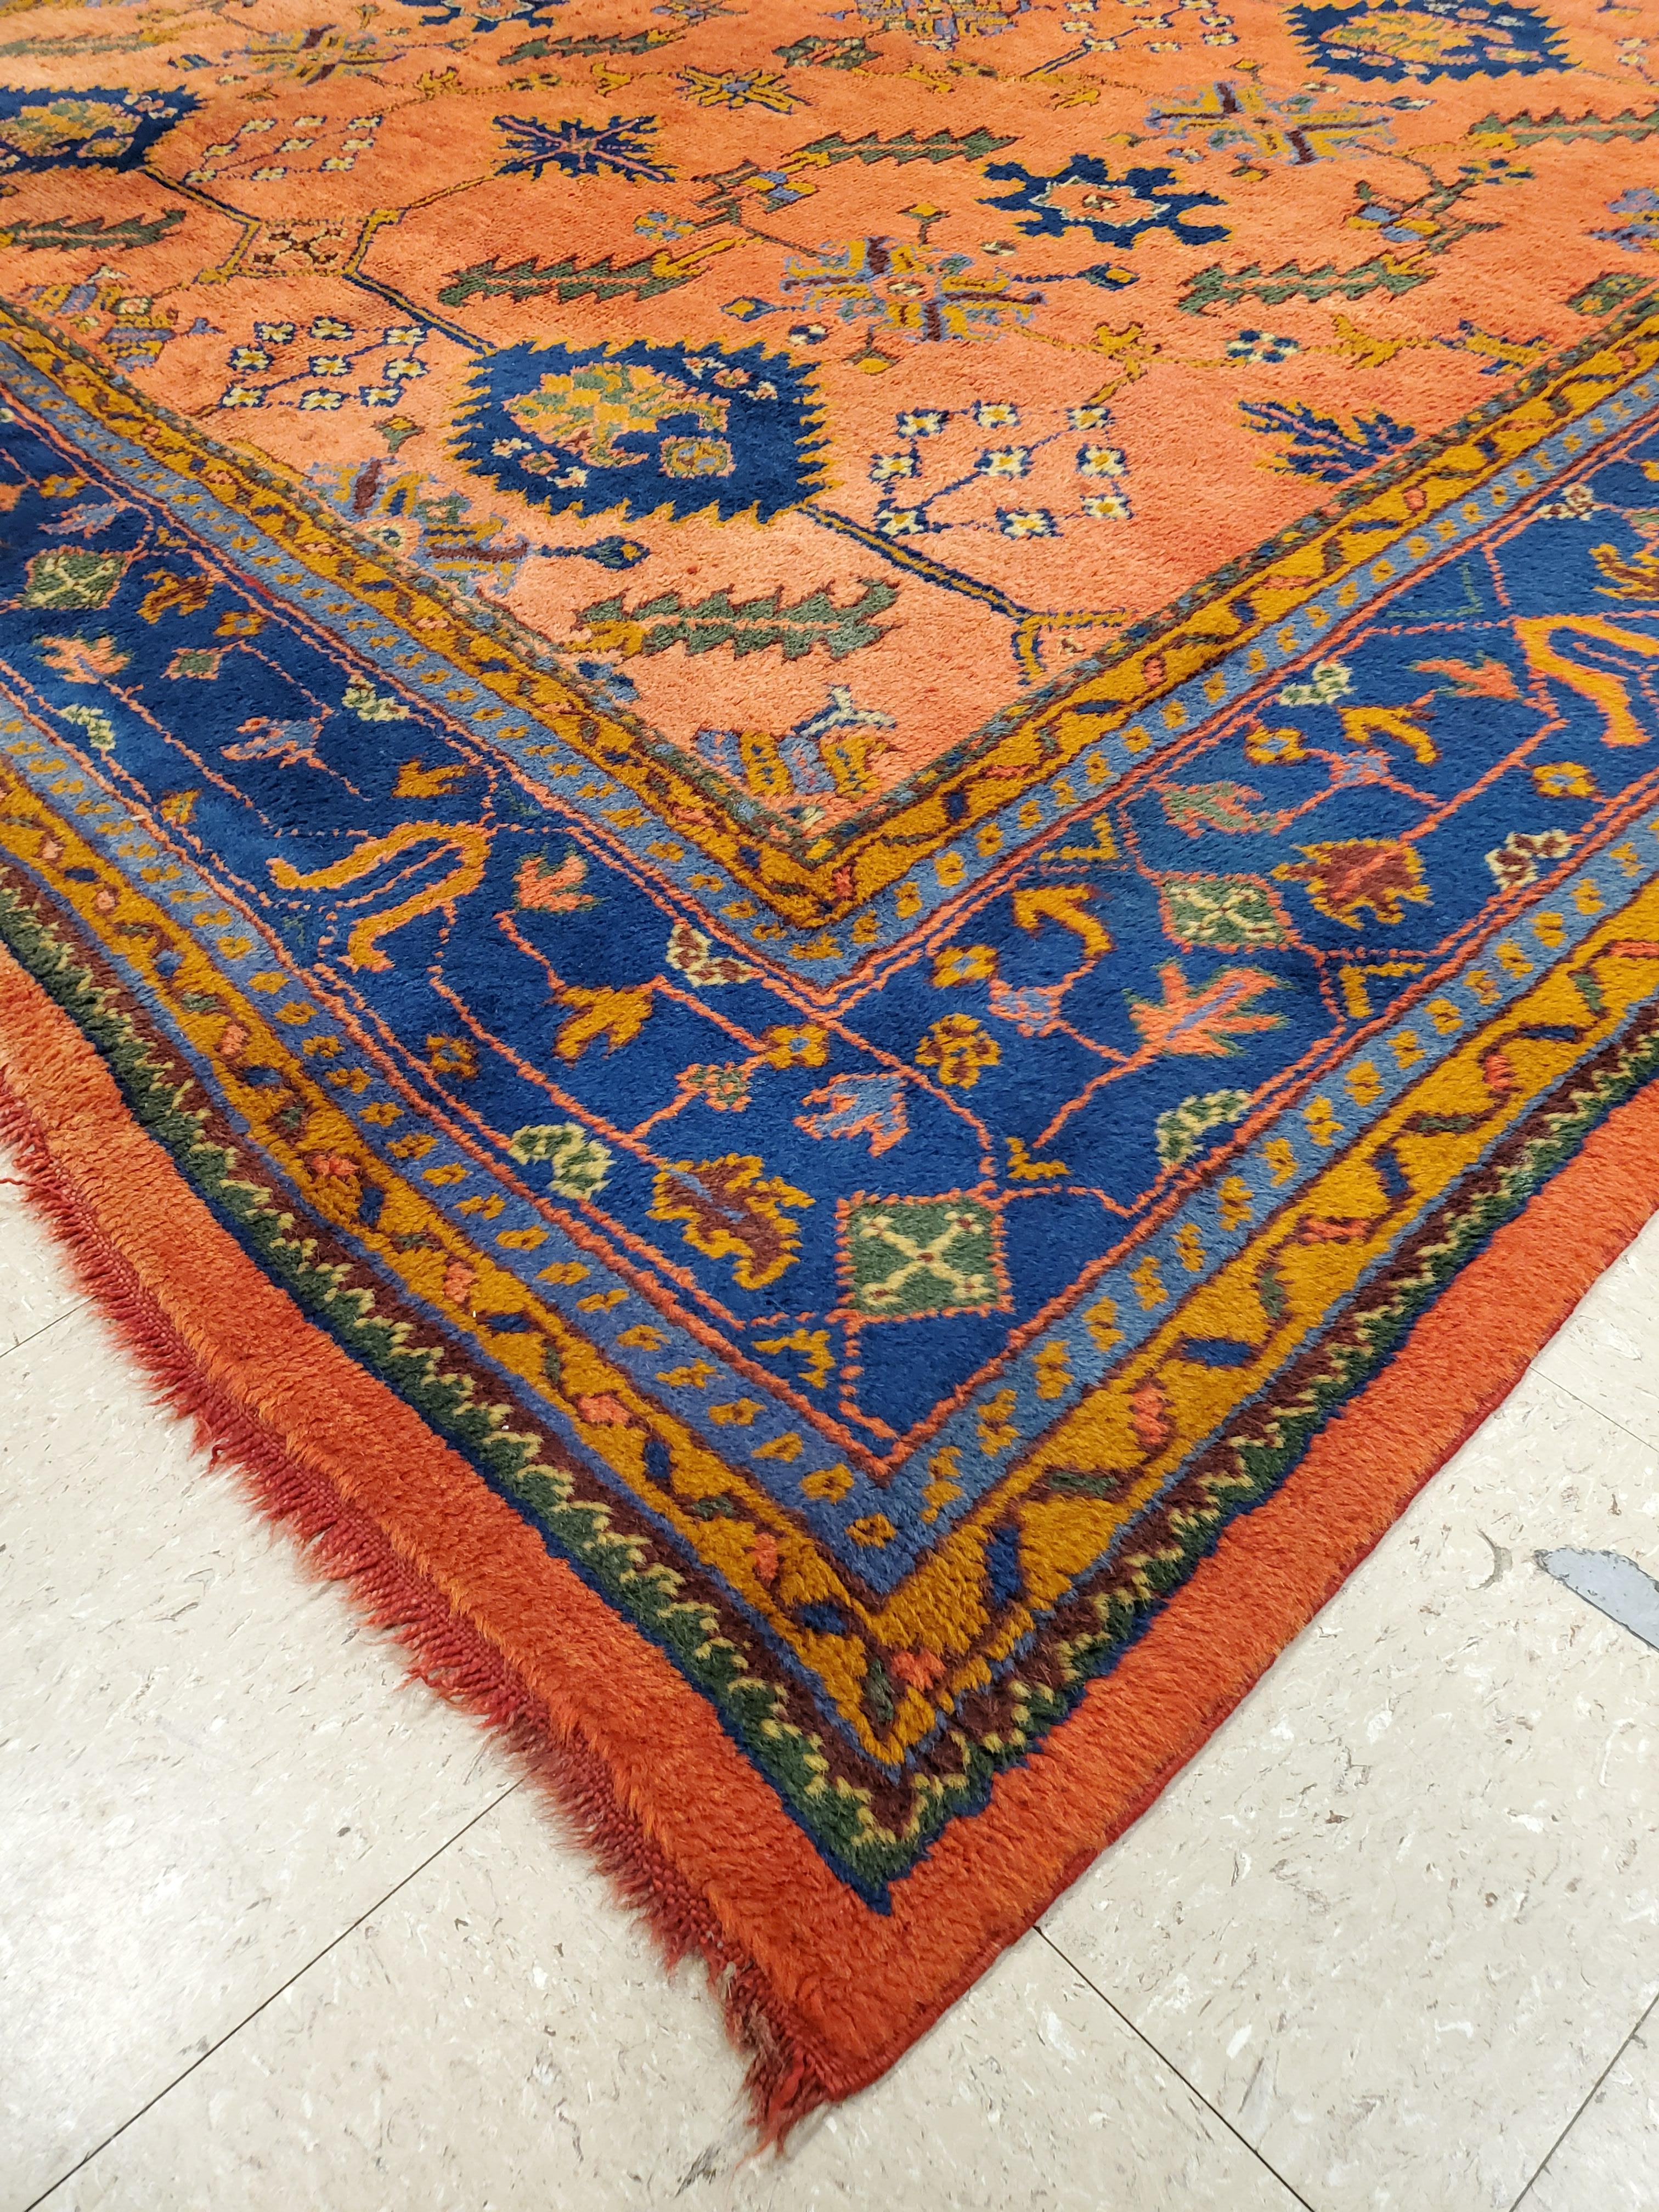 Antique Oushak Carpet, Oriental Rug, Handmade Rug Saffron, Royal Blue and Coral In Excellent Condition For Sale In Port Washington, NY